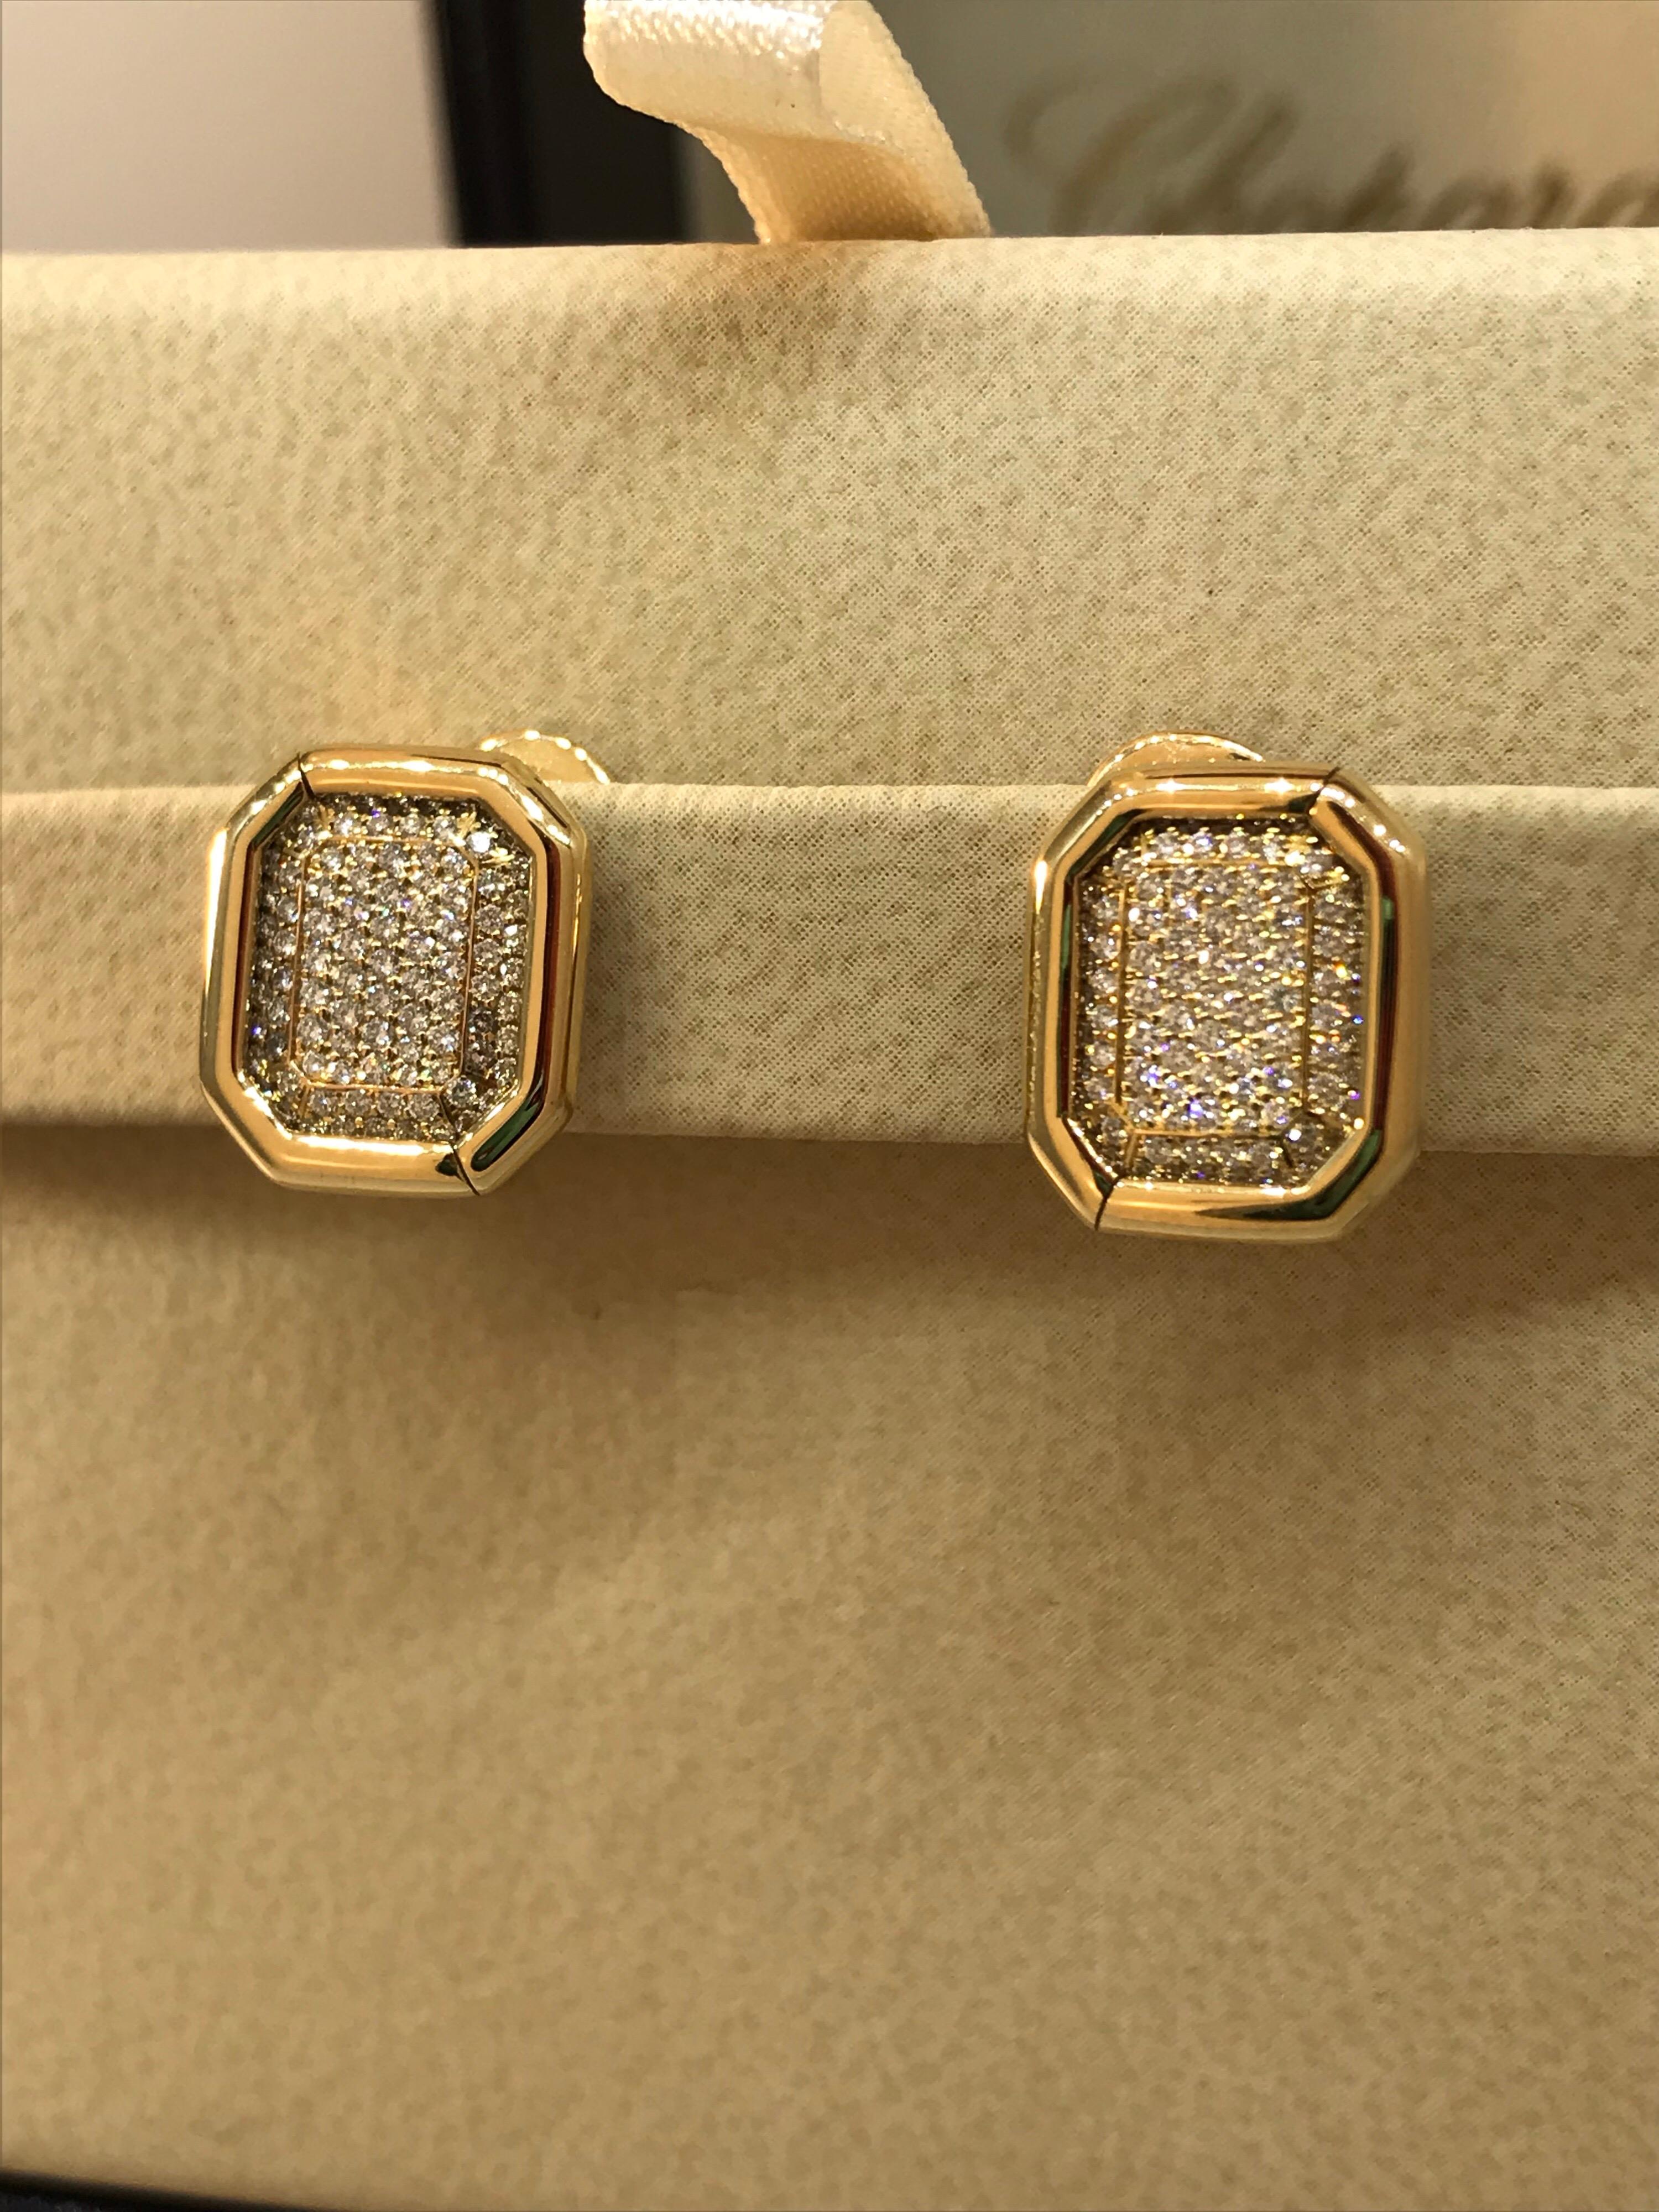 Chopard Yellow Gold Pave Diamond Earrings 84/6014 For Sale 2